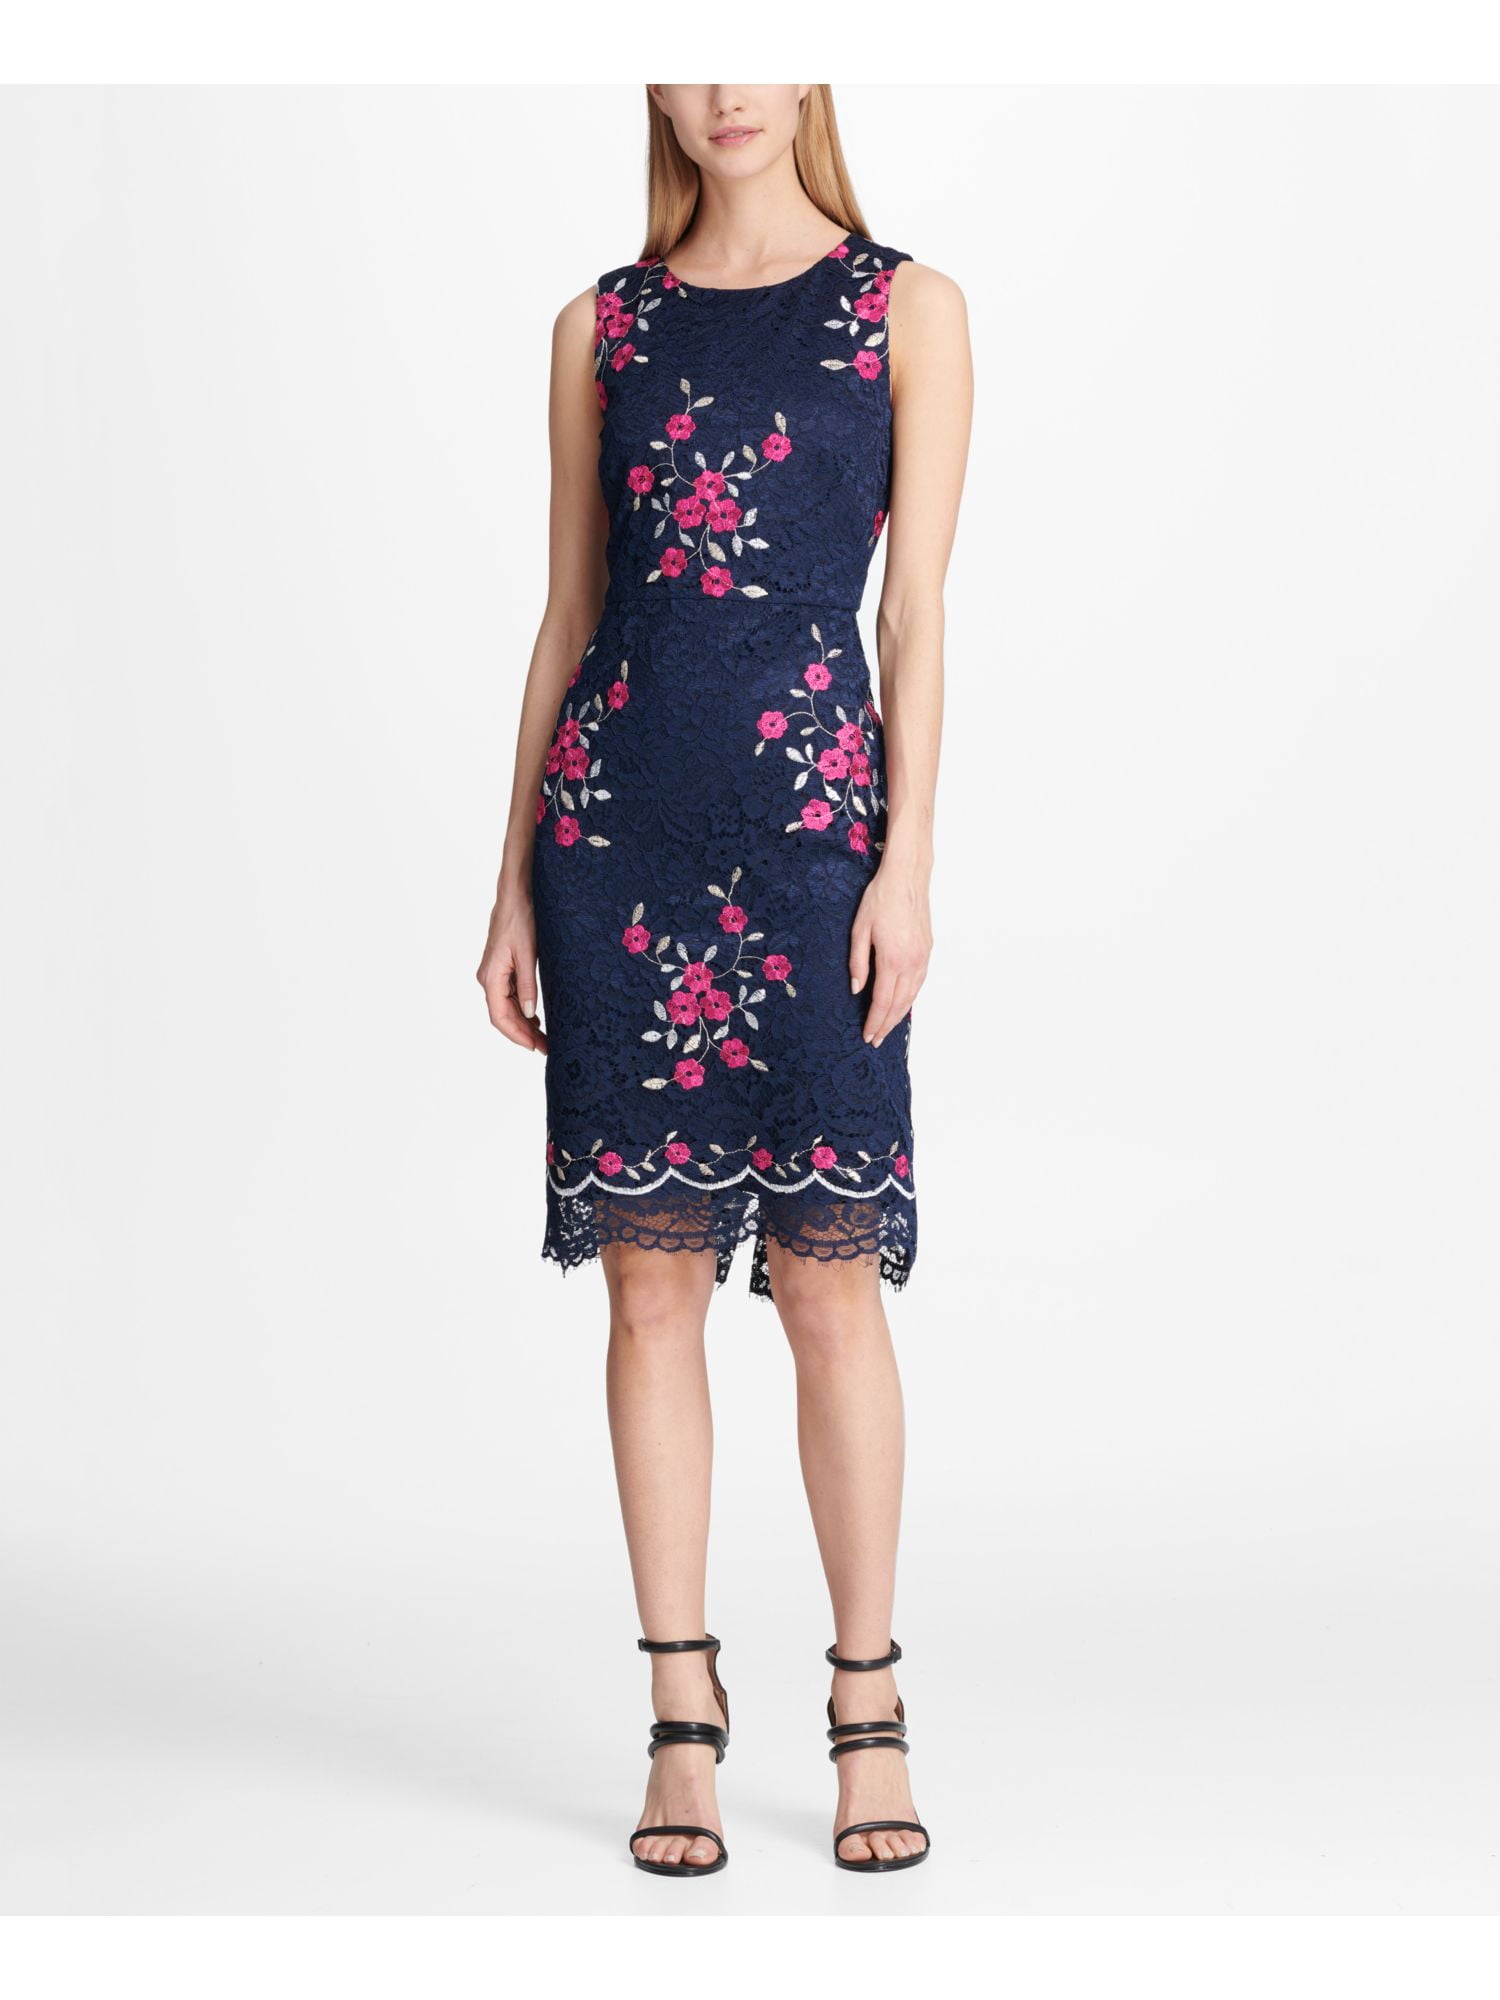 DKNY Womens Cocktail ☀ Party Dresses ...